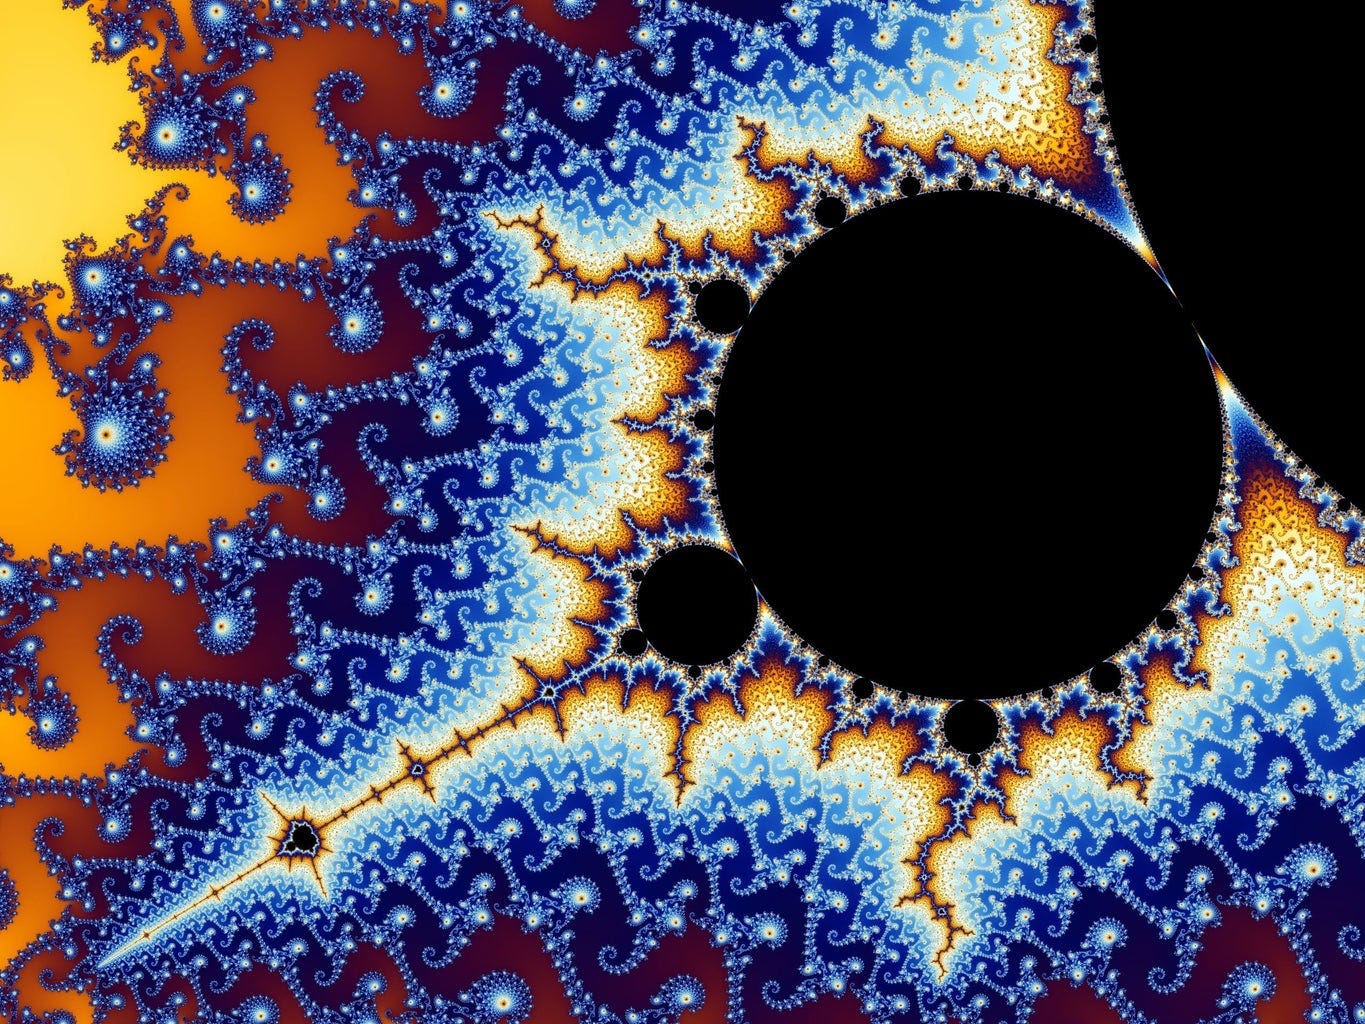 Infinite Fractal Surrounded by Fractals : 3 Steps - Instructables